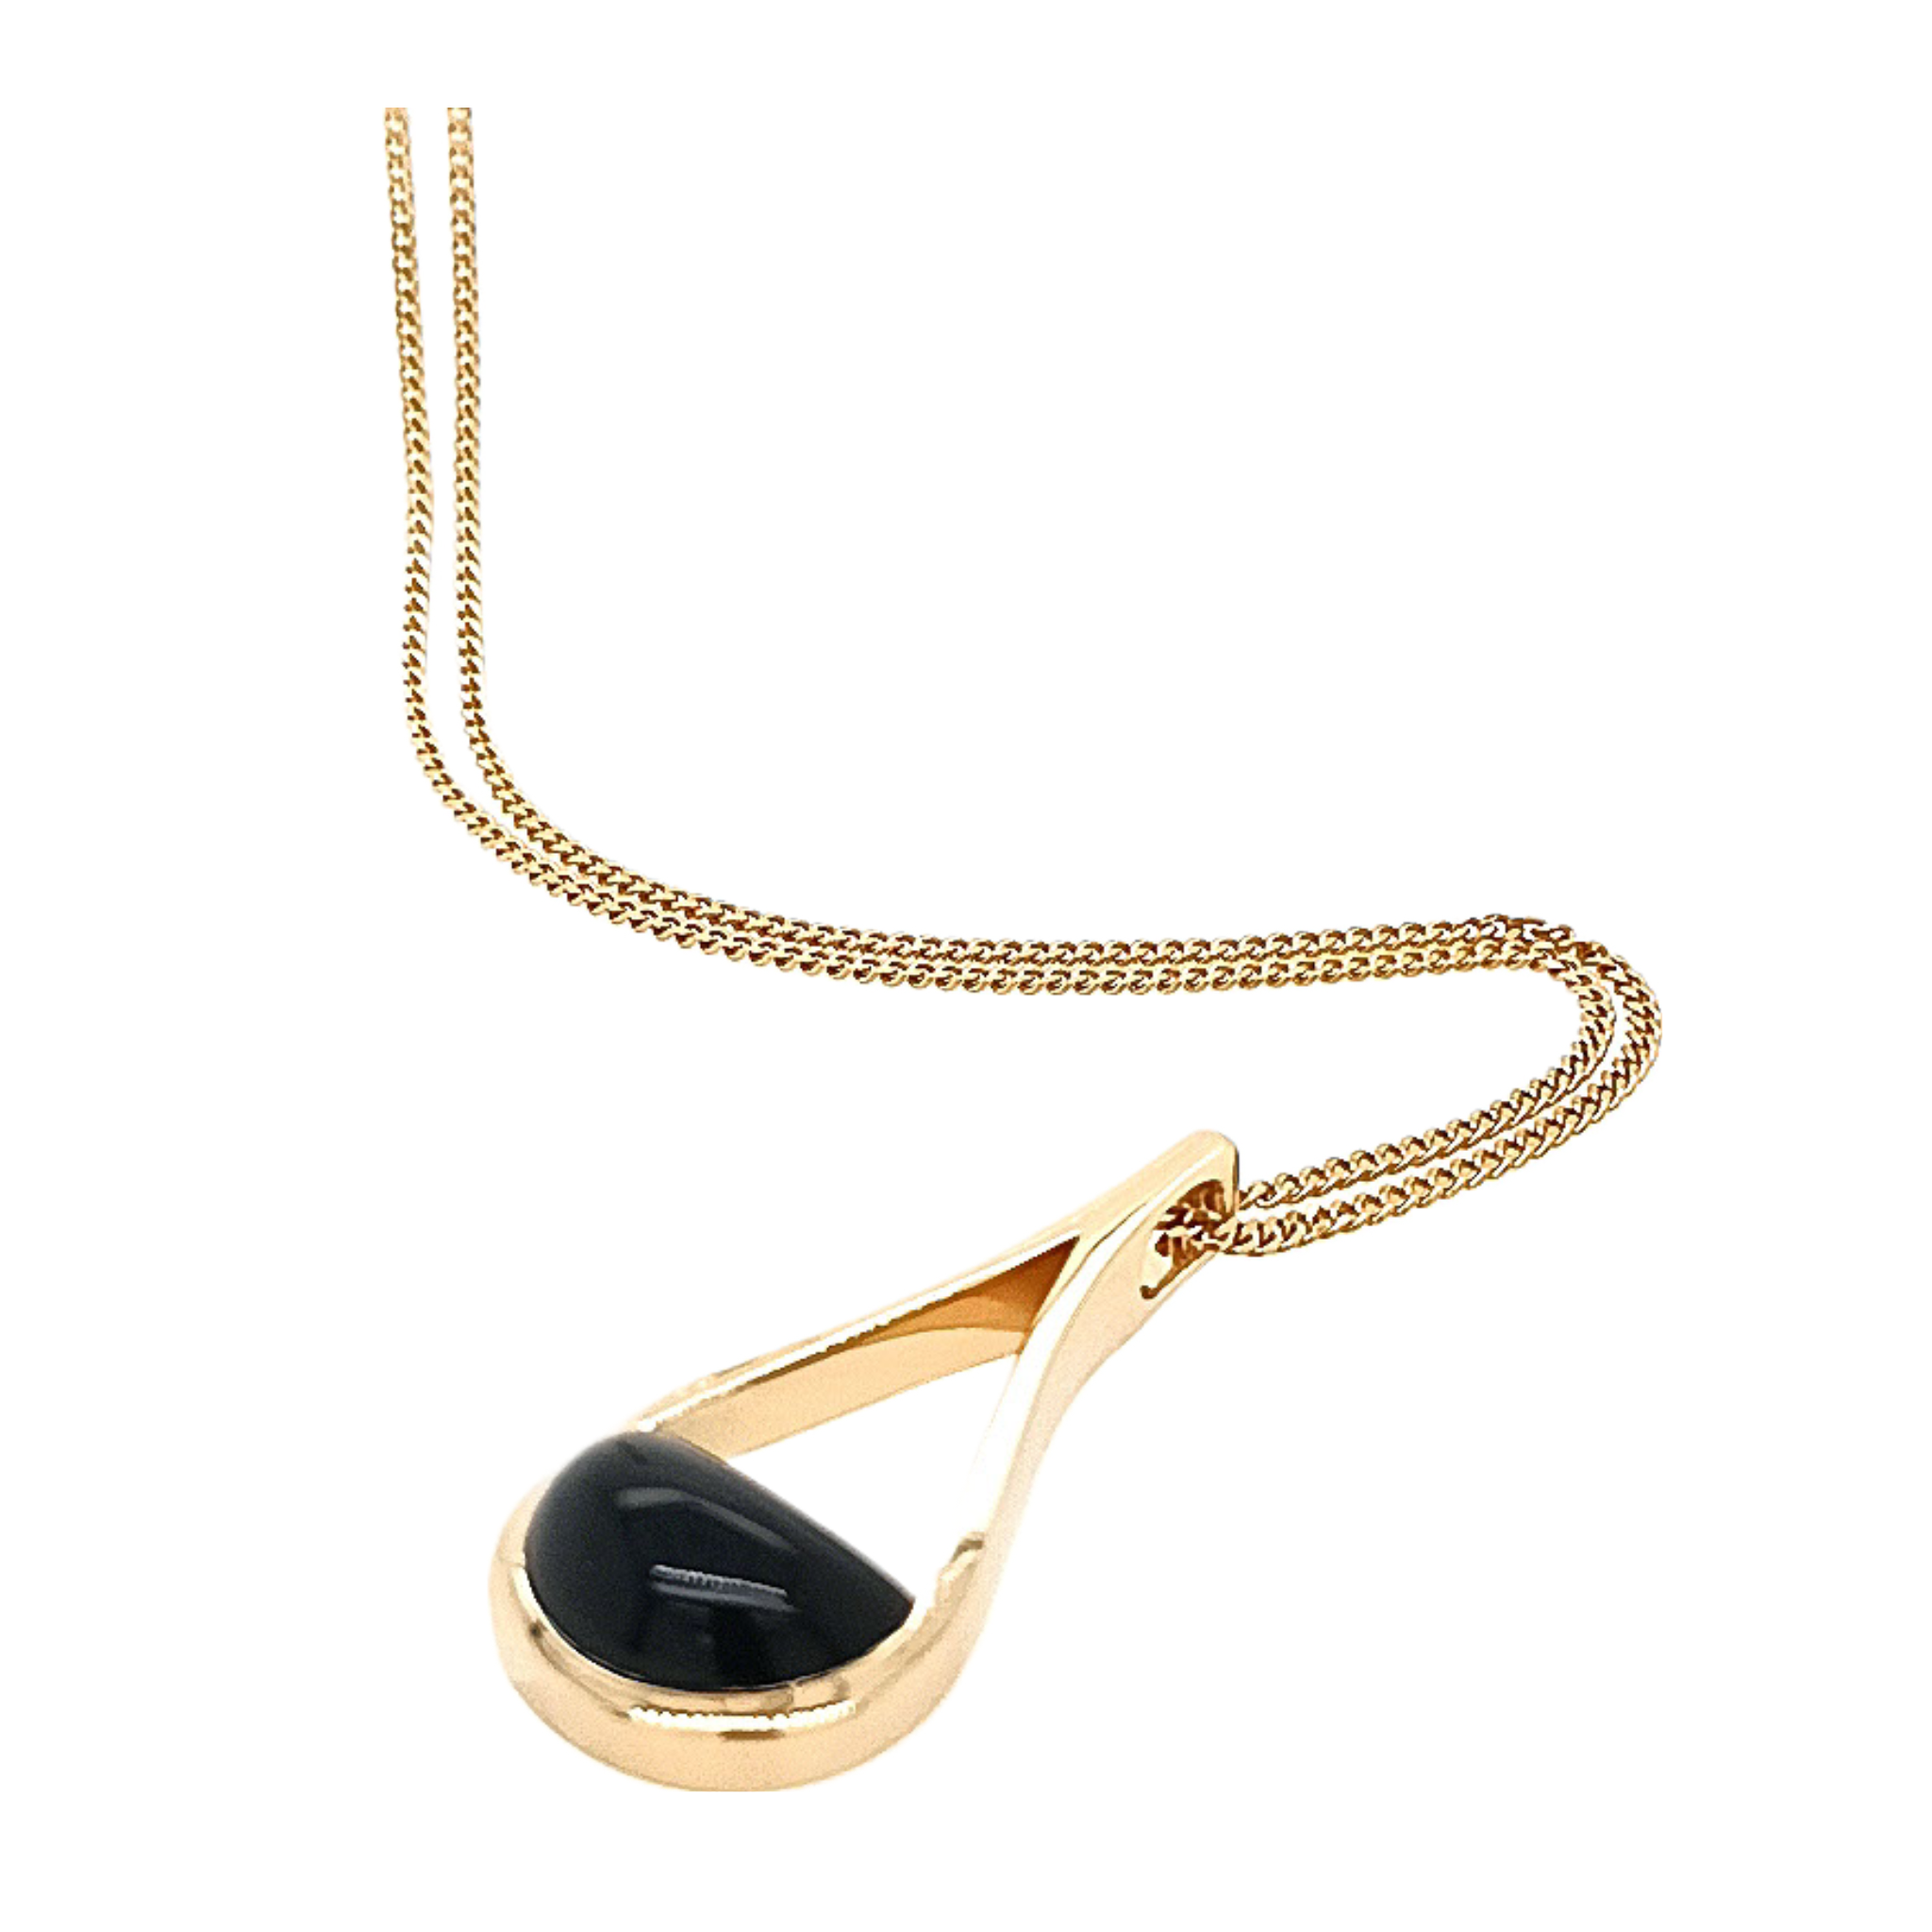 Silver Yellow Gold Plated Pear Shape and Onyx Pendant on Chain